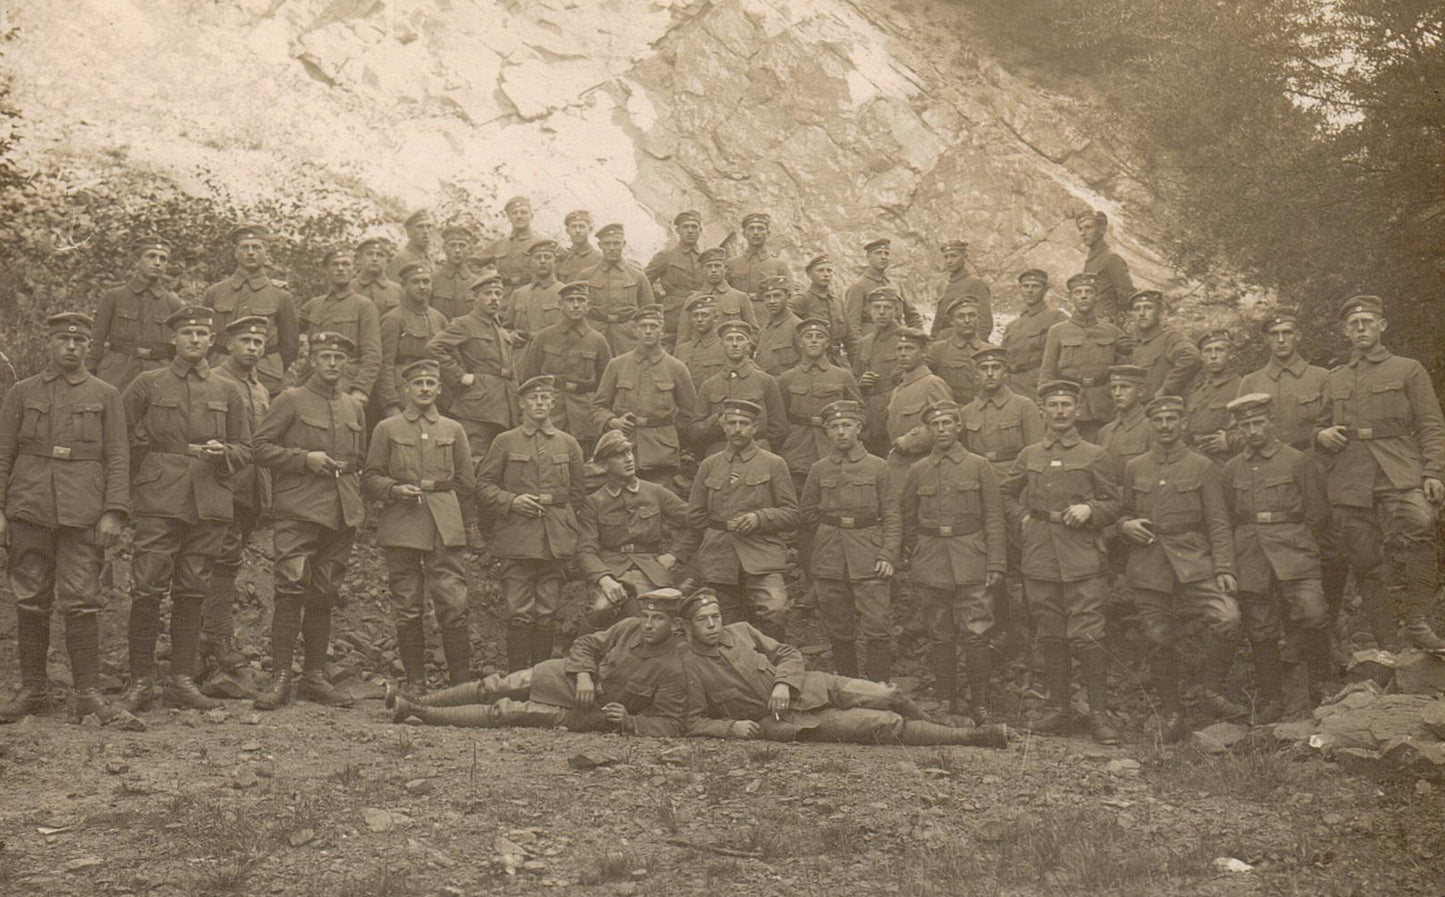 1914 War Group Soldiers